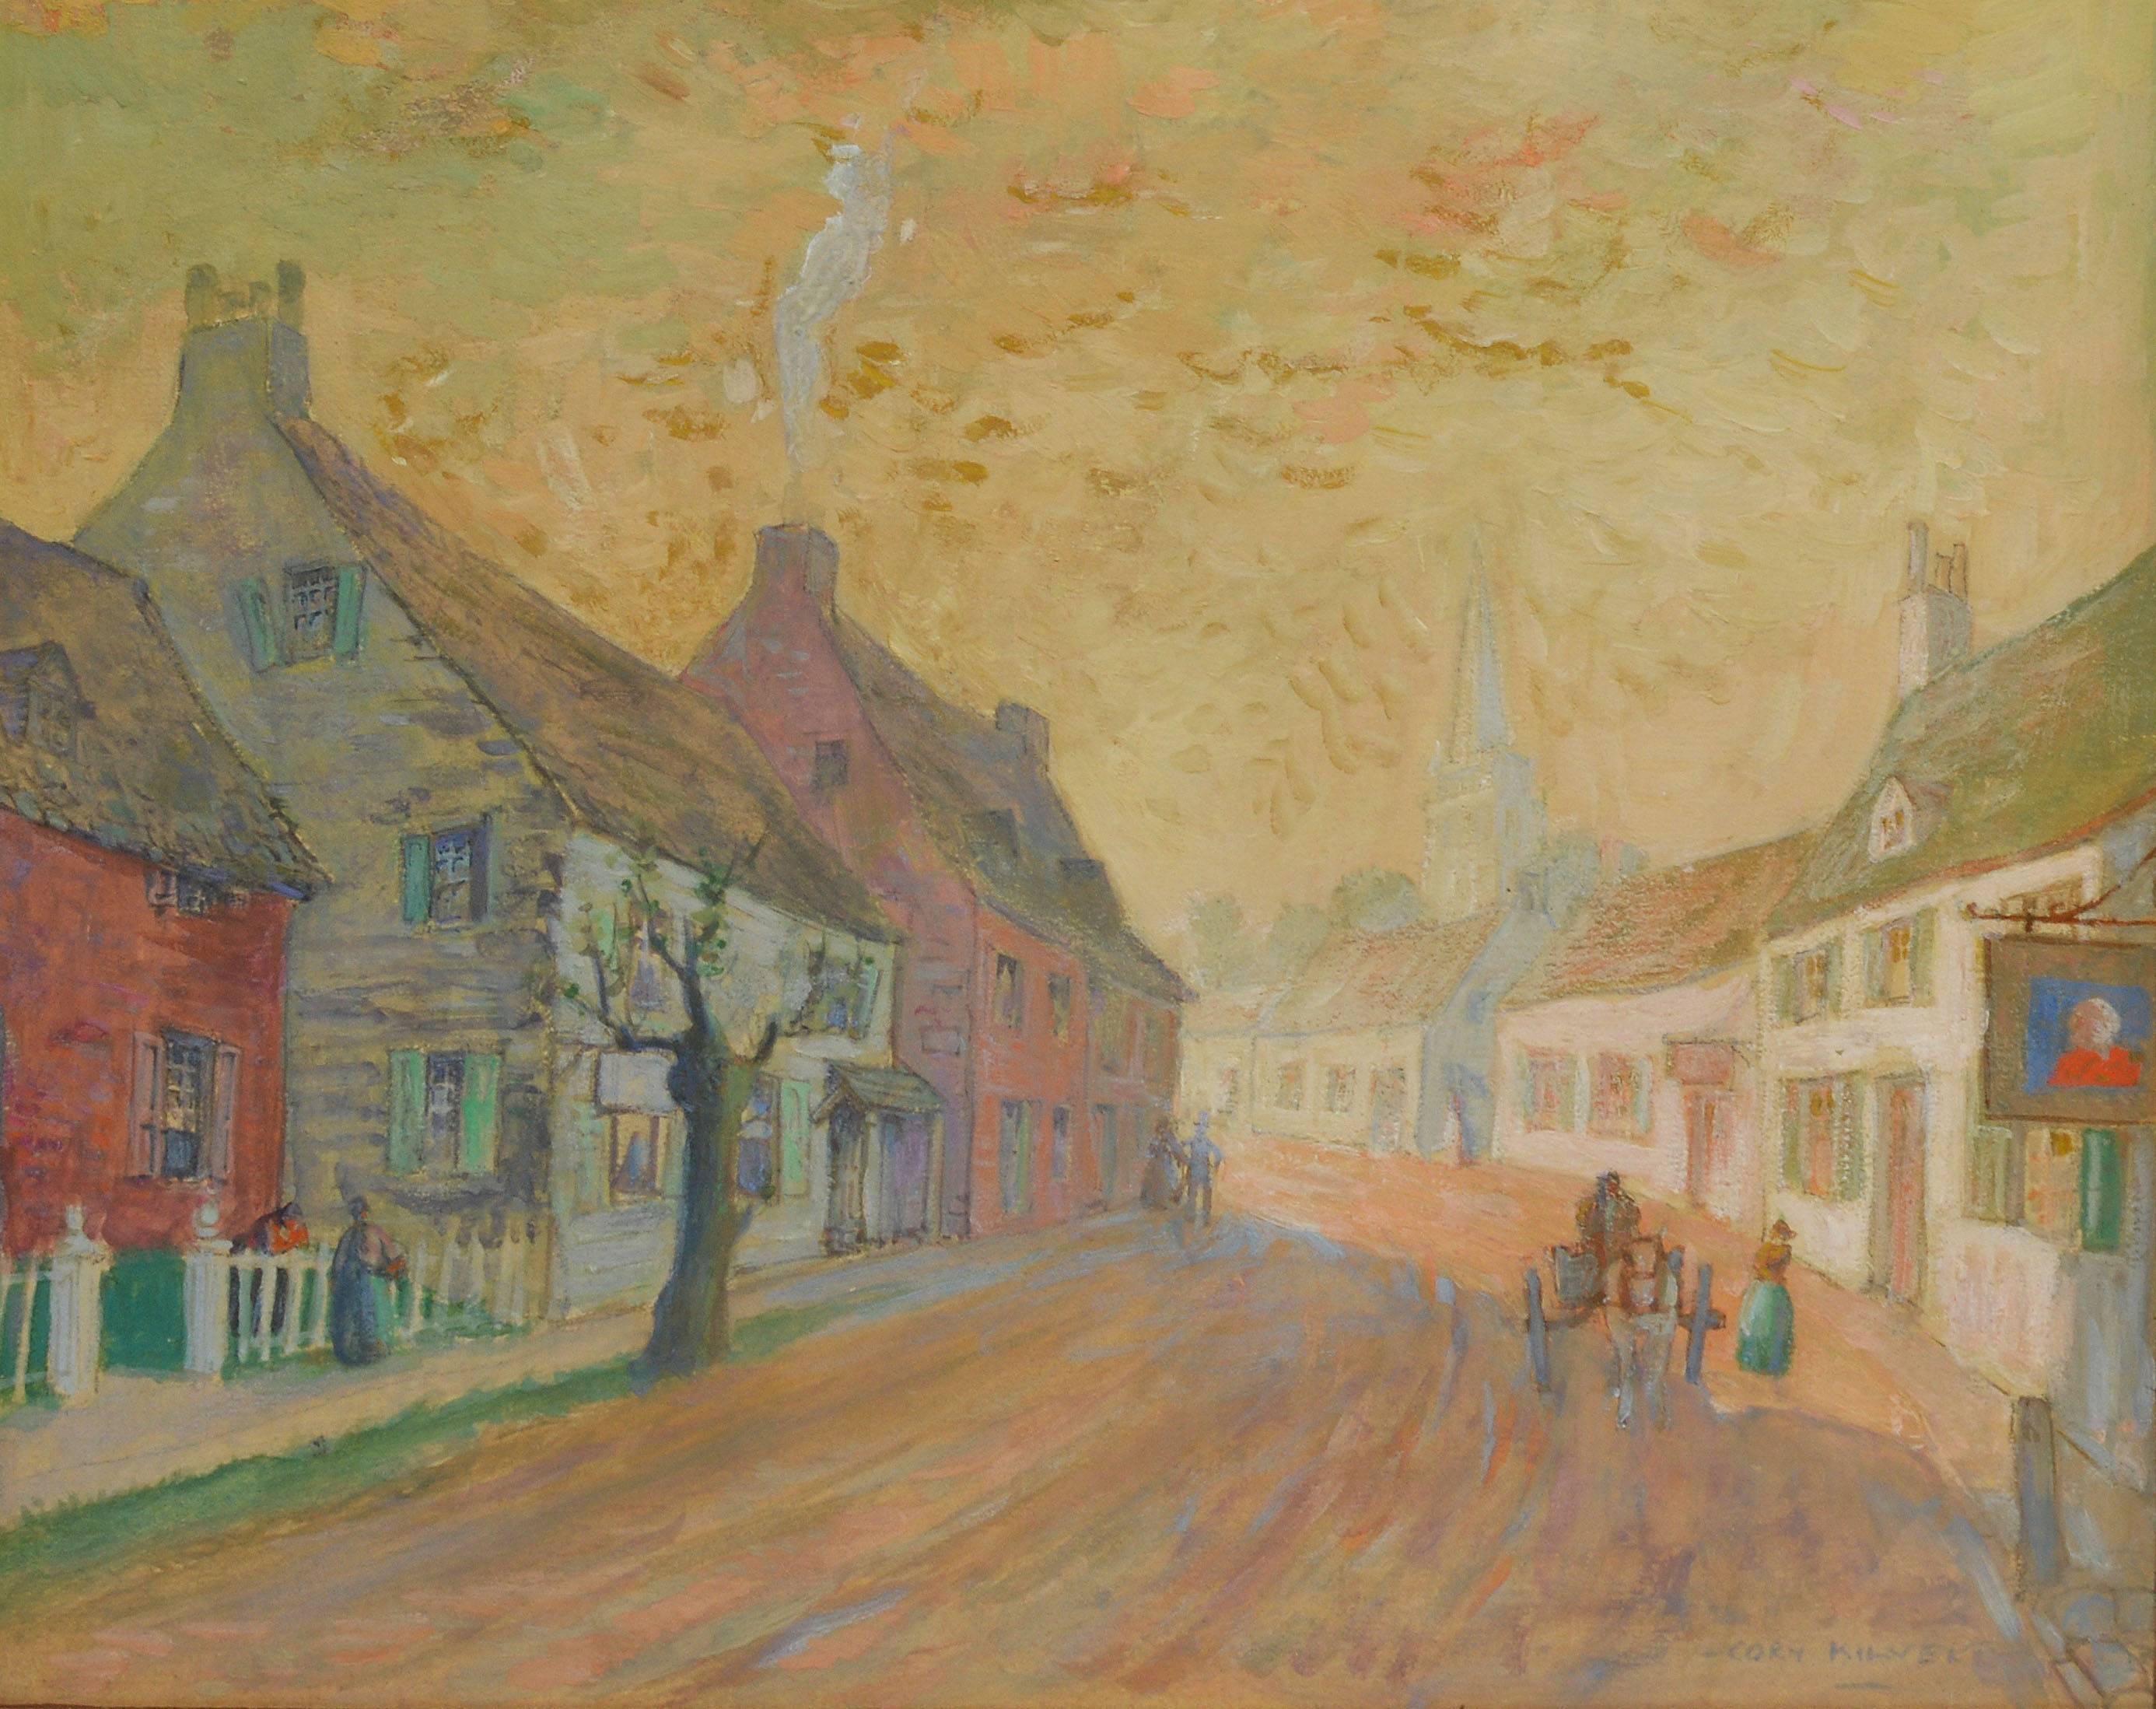 Impressionist View of a Town Street by Benjamin Sayre Cory Kilvert - Brown Landscape Painting by Benjamin Sayre Cory Kilvert 